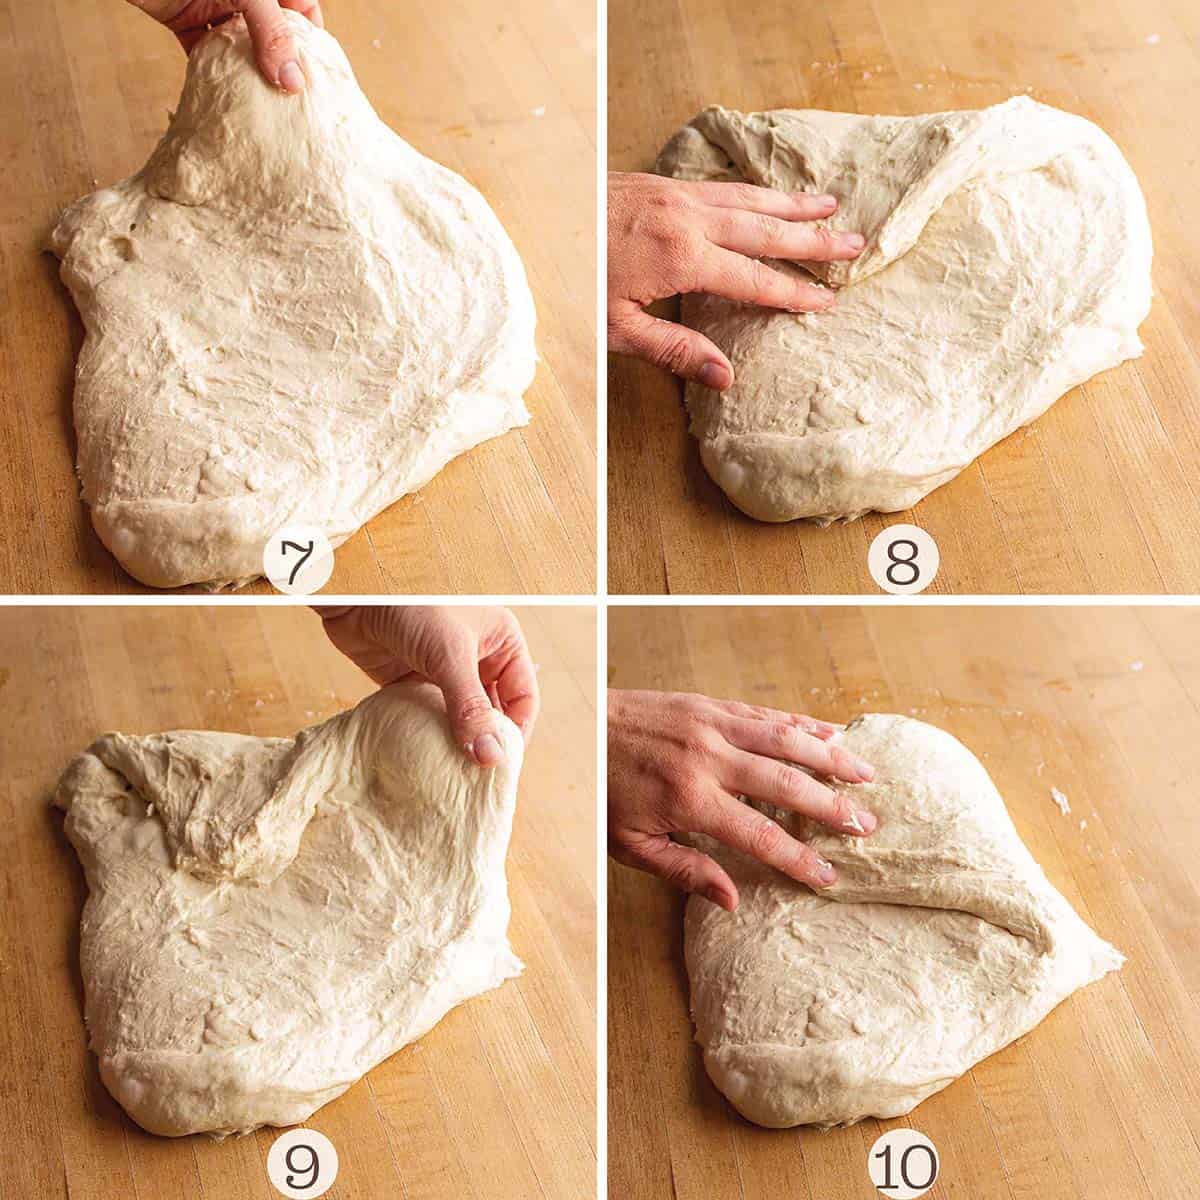 Four images of the steps to shape a loaf of sourdough.